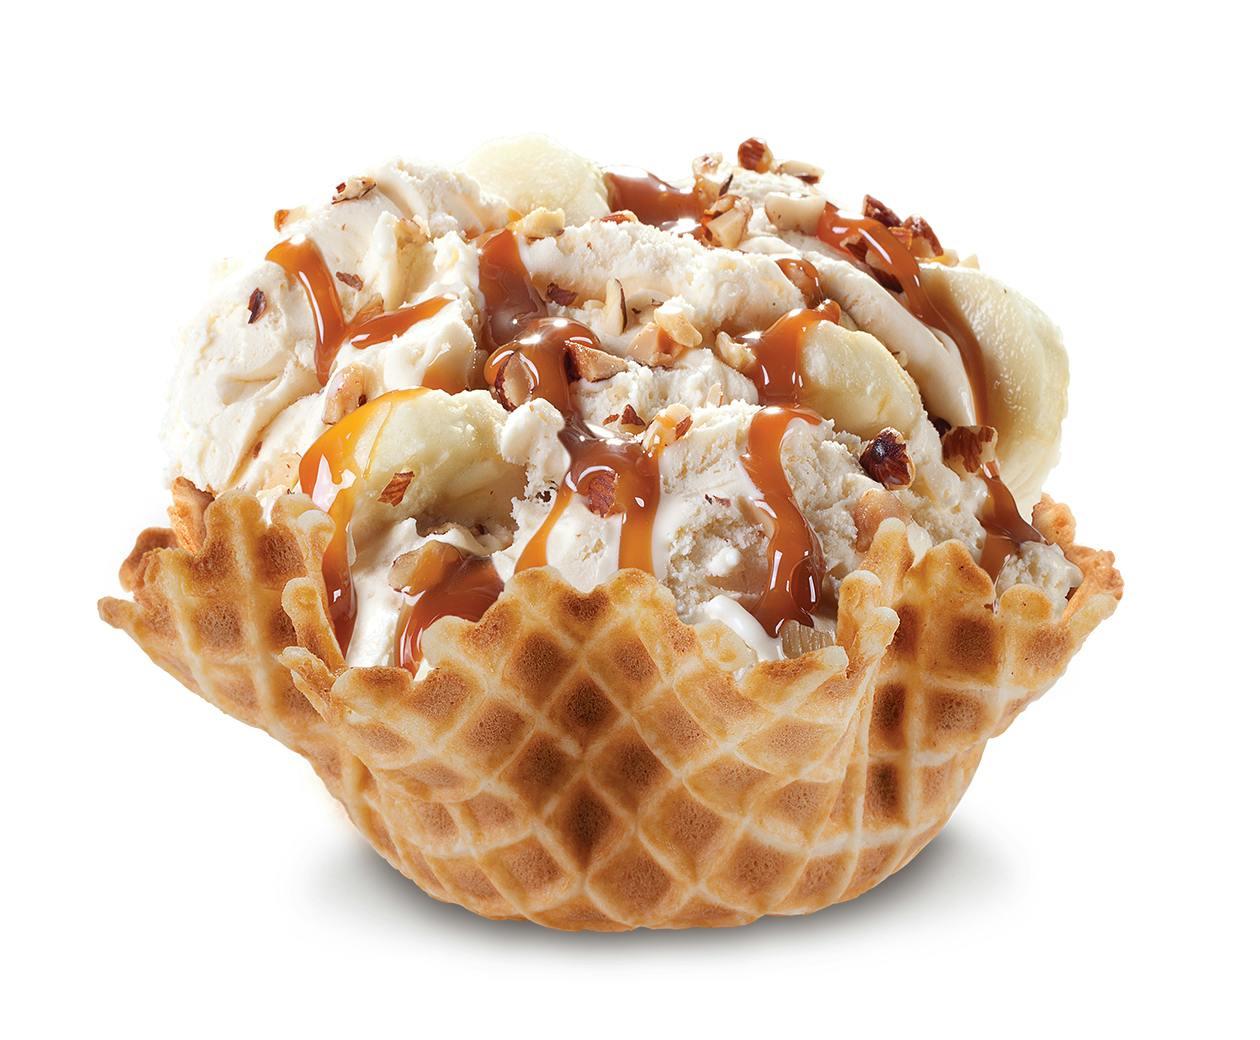 Banana Caramel Crunch from Cold Stone Creamery - Lawrence in Lawrence, KS